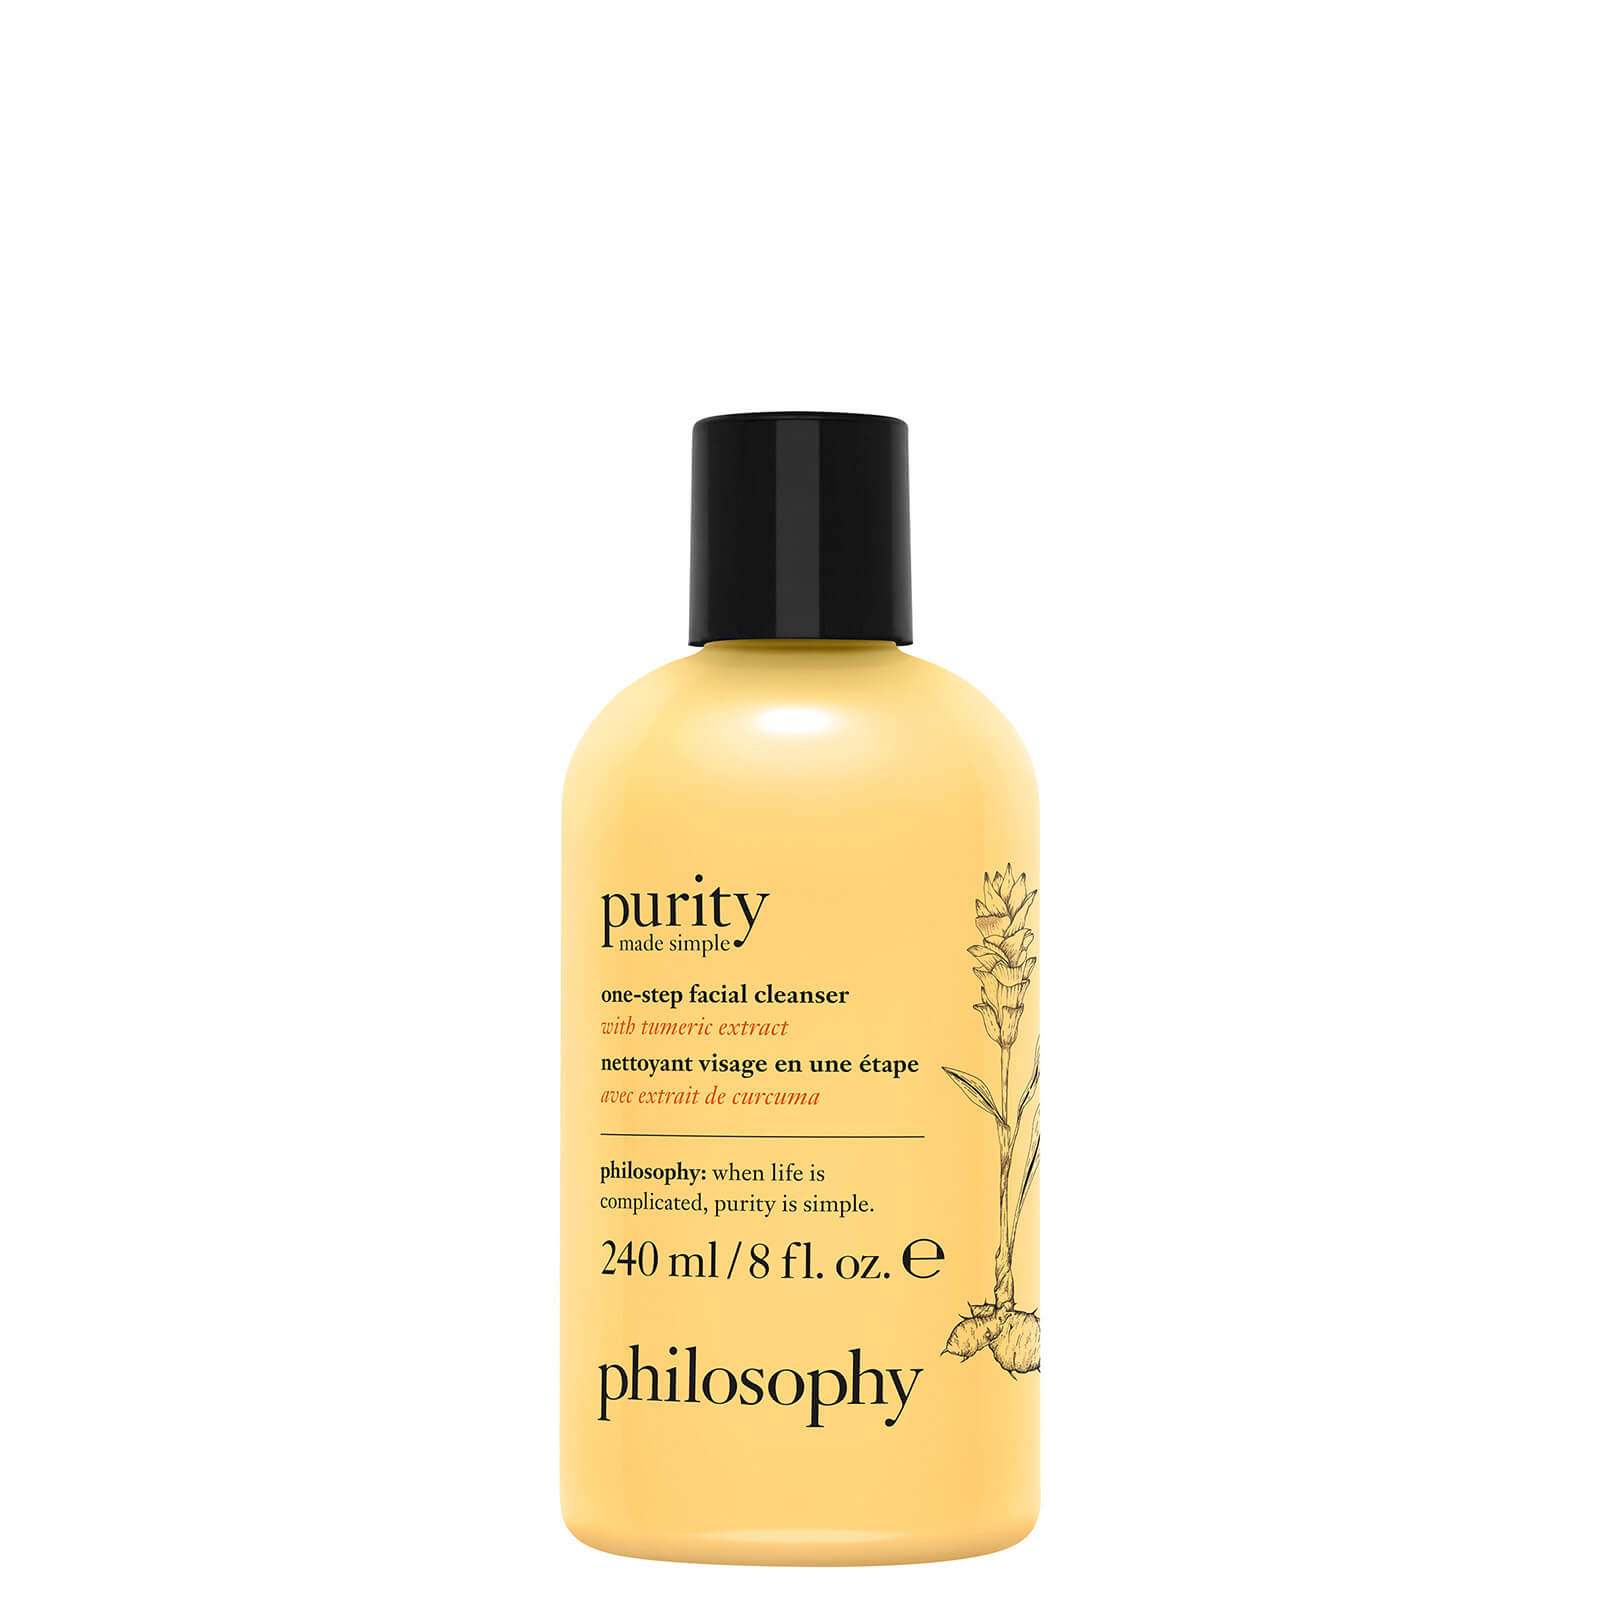 philosophy Exclusive Purity Facial Cleanser with Turmeric Extract 240ml lookfantastic.com imagine